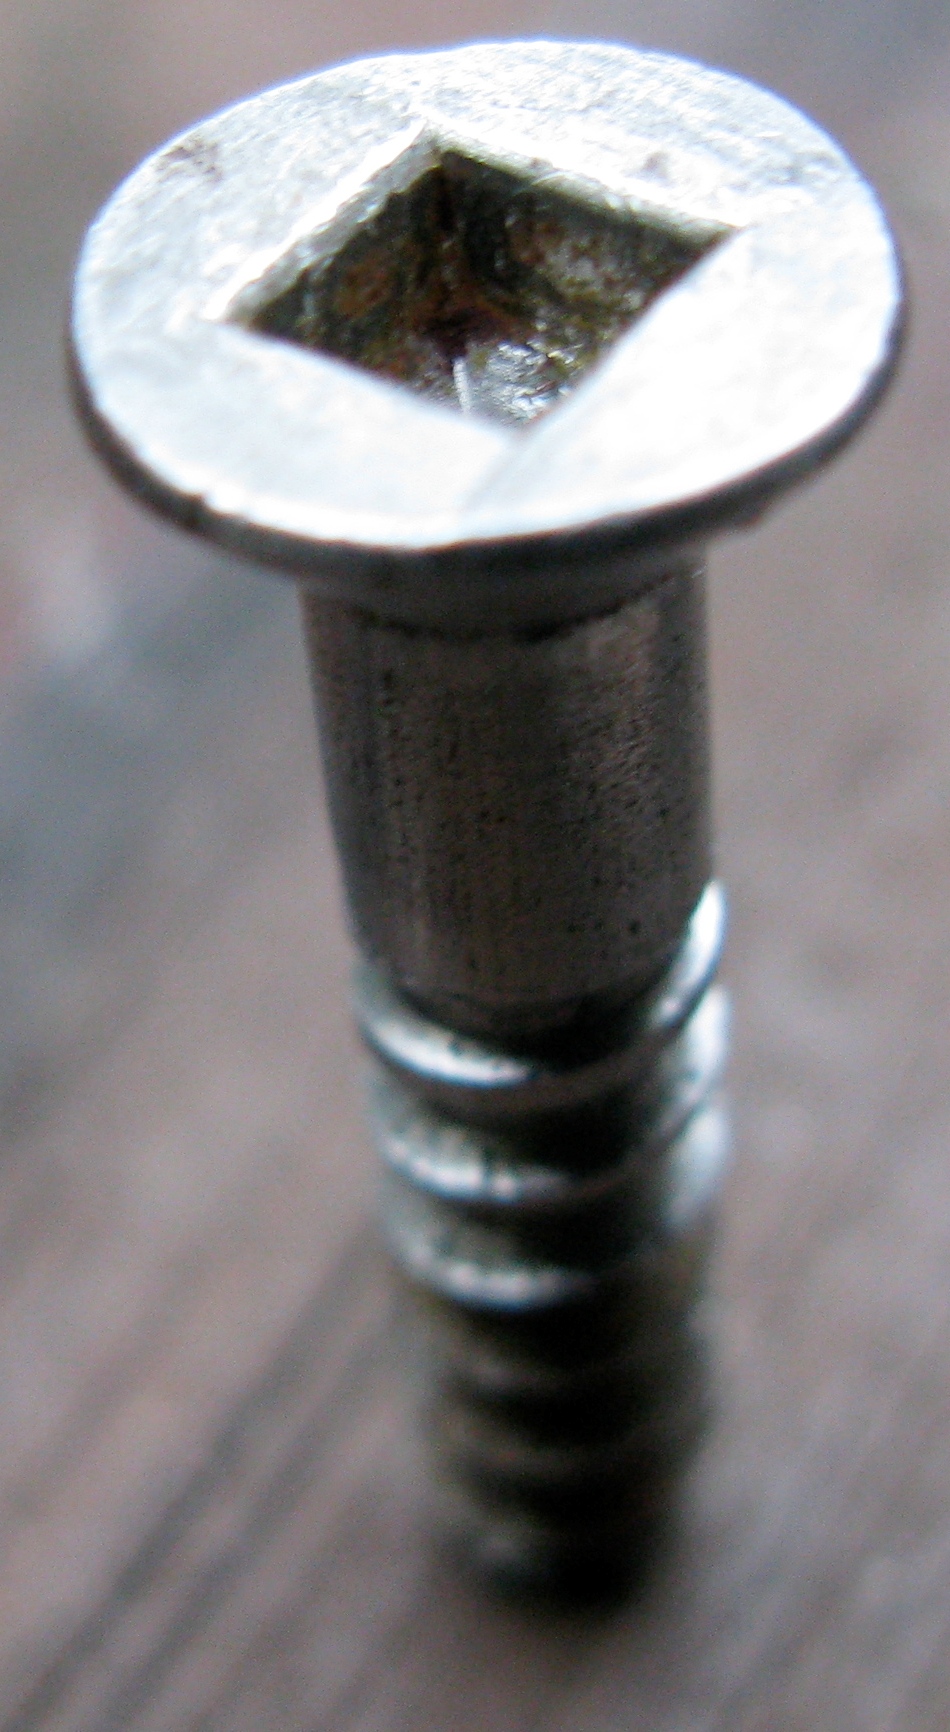 34. The Robertson screw - invented by P.L. Roberston. 